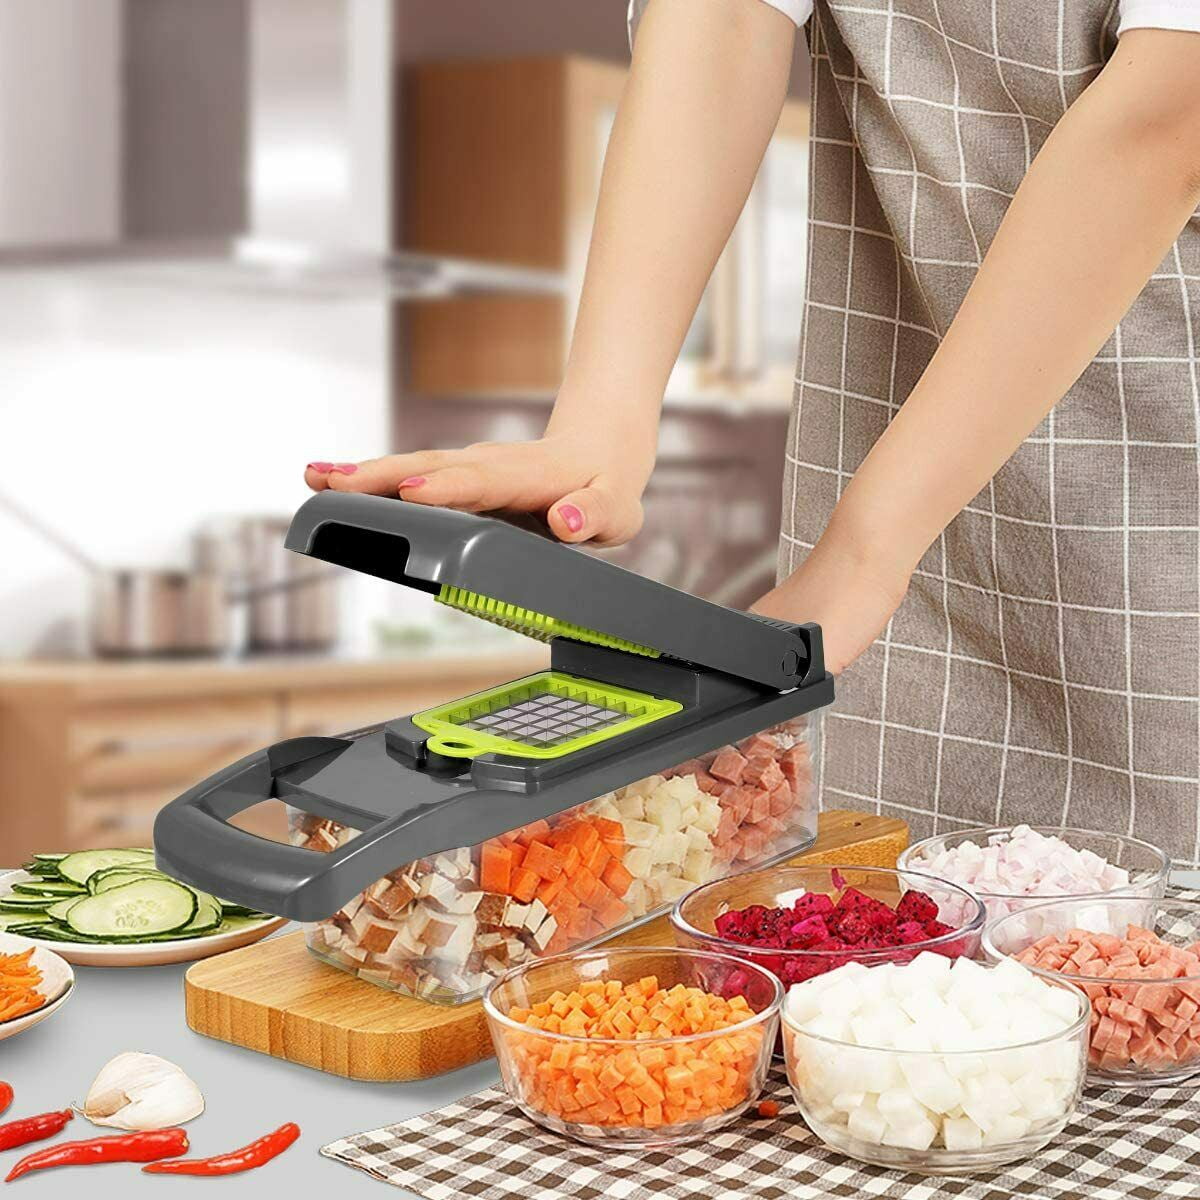 🔥SALE🔥 Vegetable Choppers Onion Chopper, 12 in 1 Vegetable Cutter Pro Slicer  Dicer Cutter-Manual - Kitchen Tools & Utensils, Facebook Marketplace